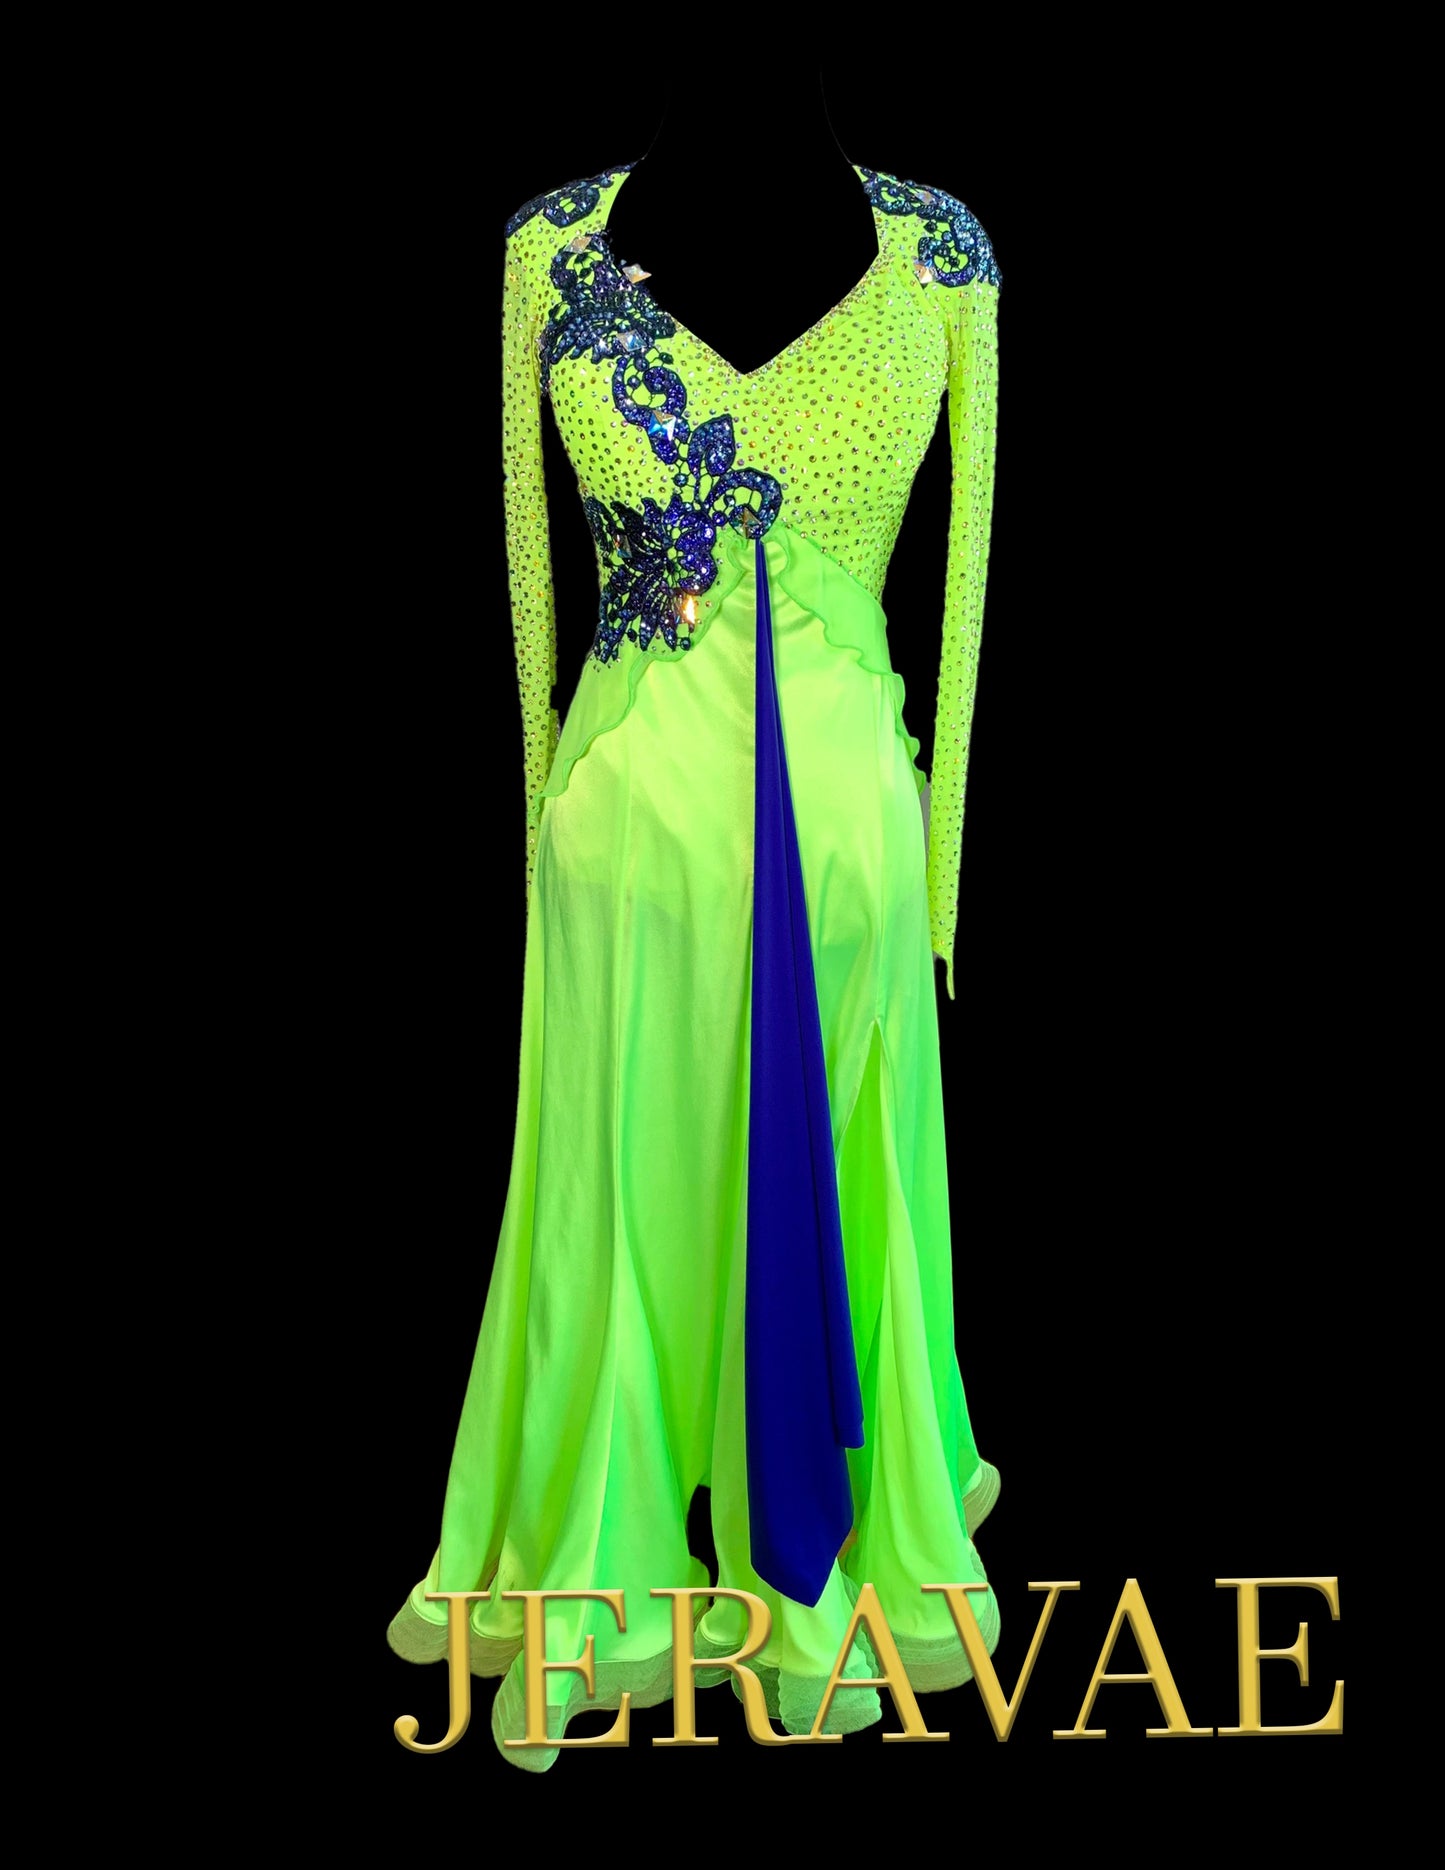 Lime Green Long Sleeve Smooth Ballroom Dress with Blue Lace Applique, Swarovski Stones, Blue Sash, and Exposed Horsehair Hem Sz XS Smo202